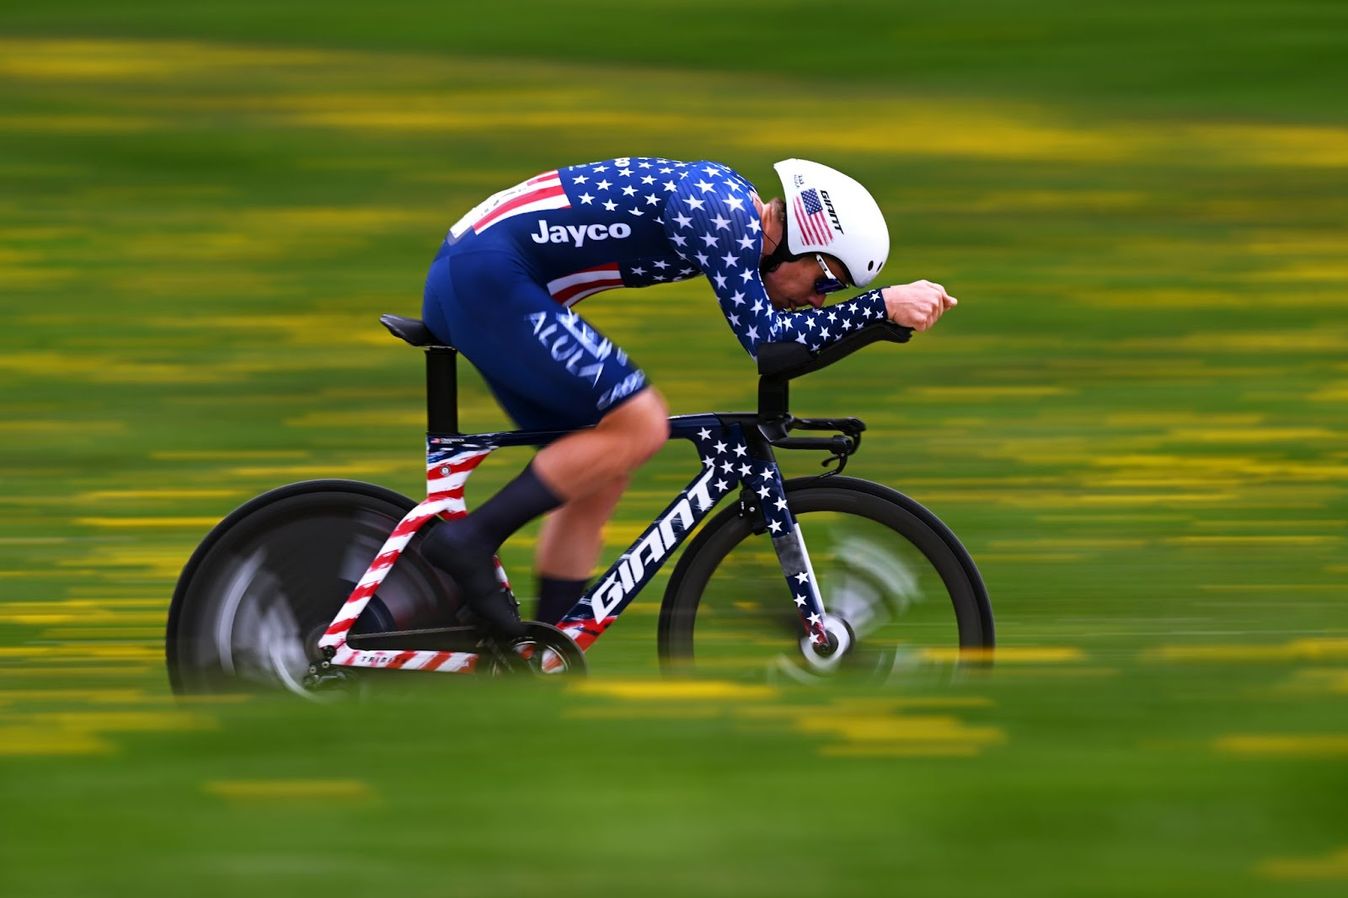 Lawson Craddock during the stage 3 time trial at the Tour de Romandie